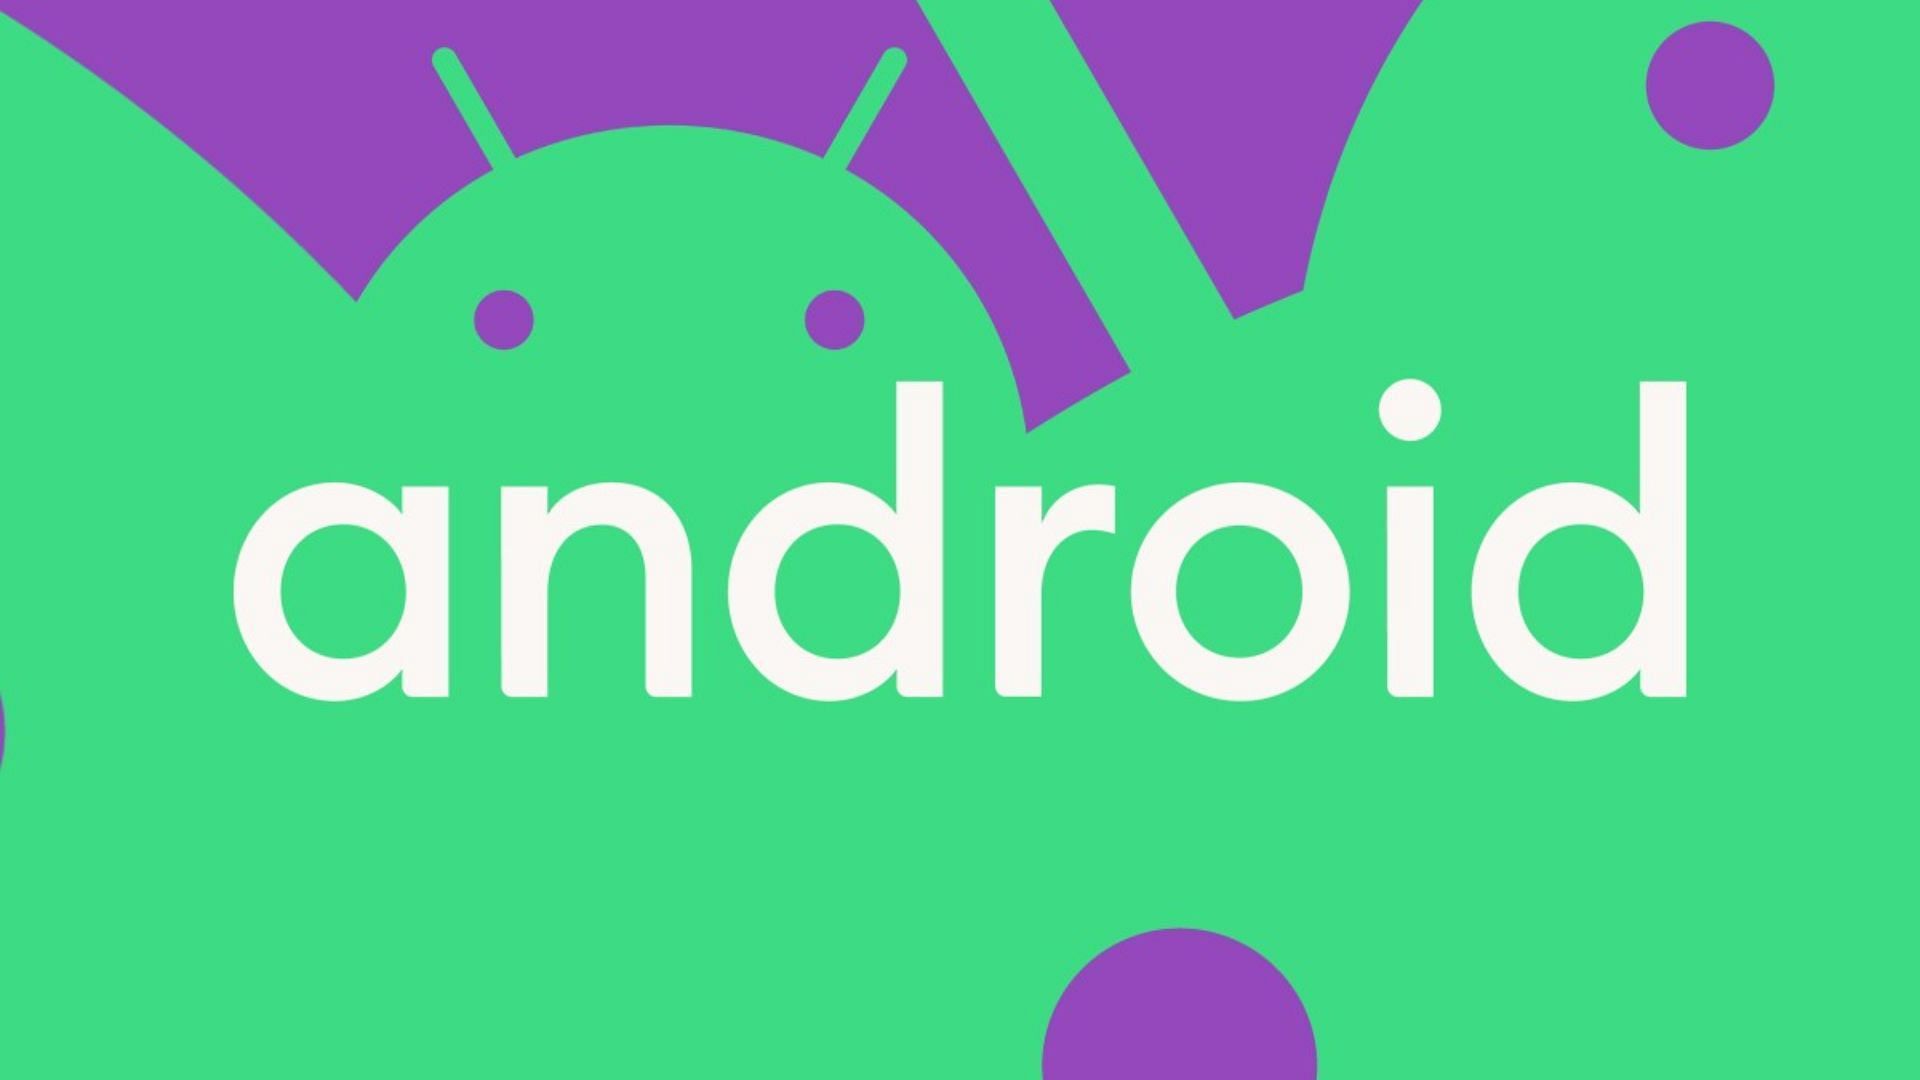 Android logo and droids in background